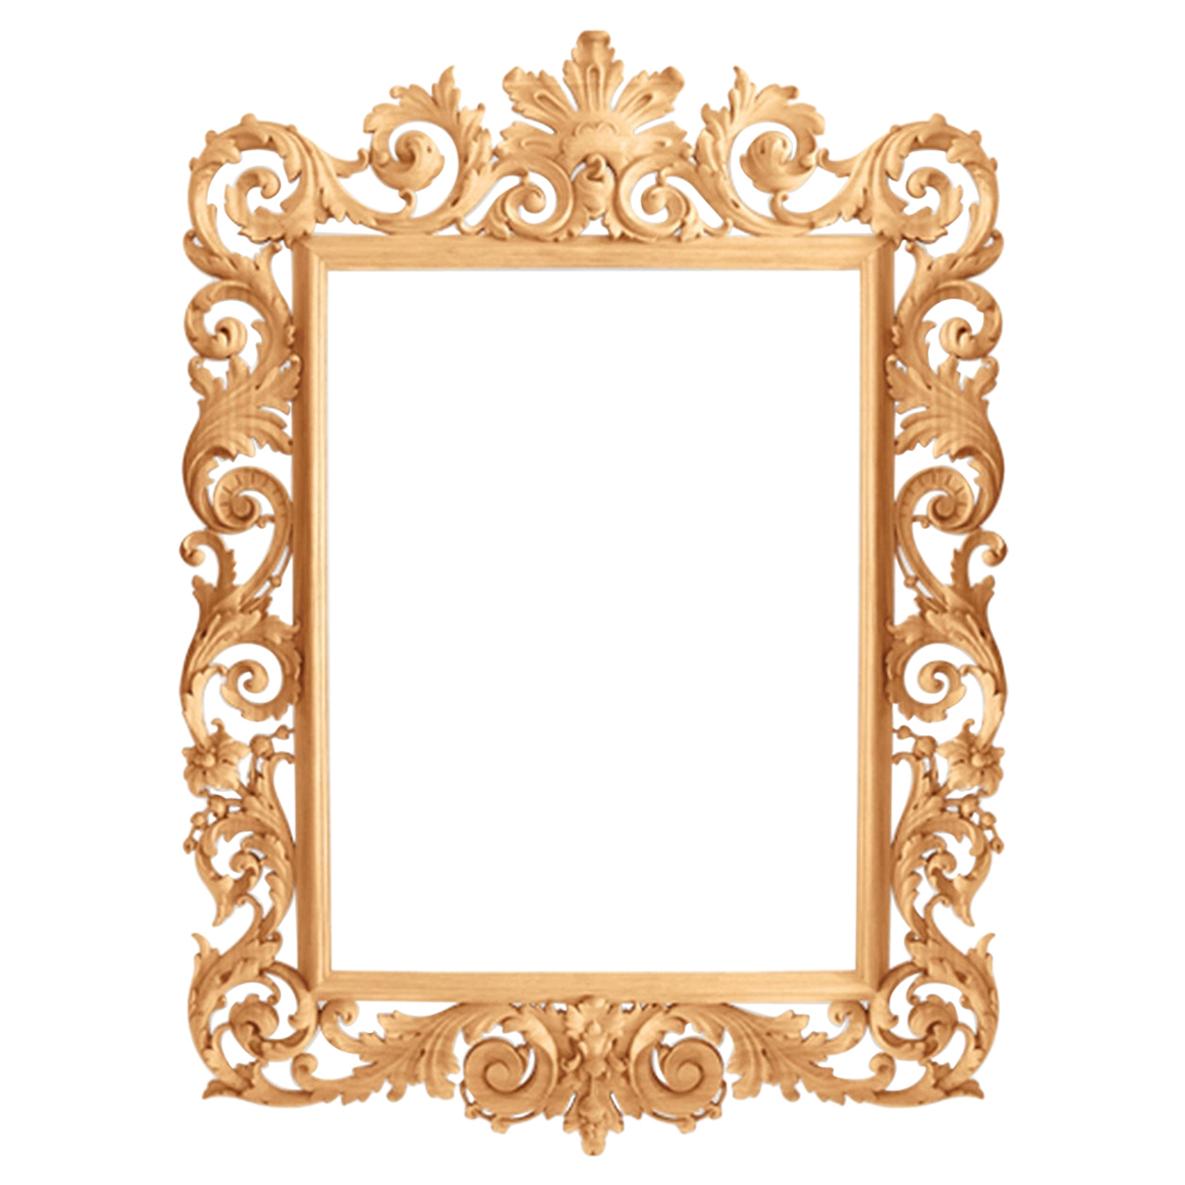 Nice Wall Mirror Frame from Oak or Beech For Sale